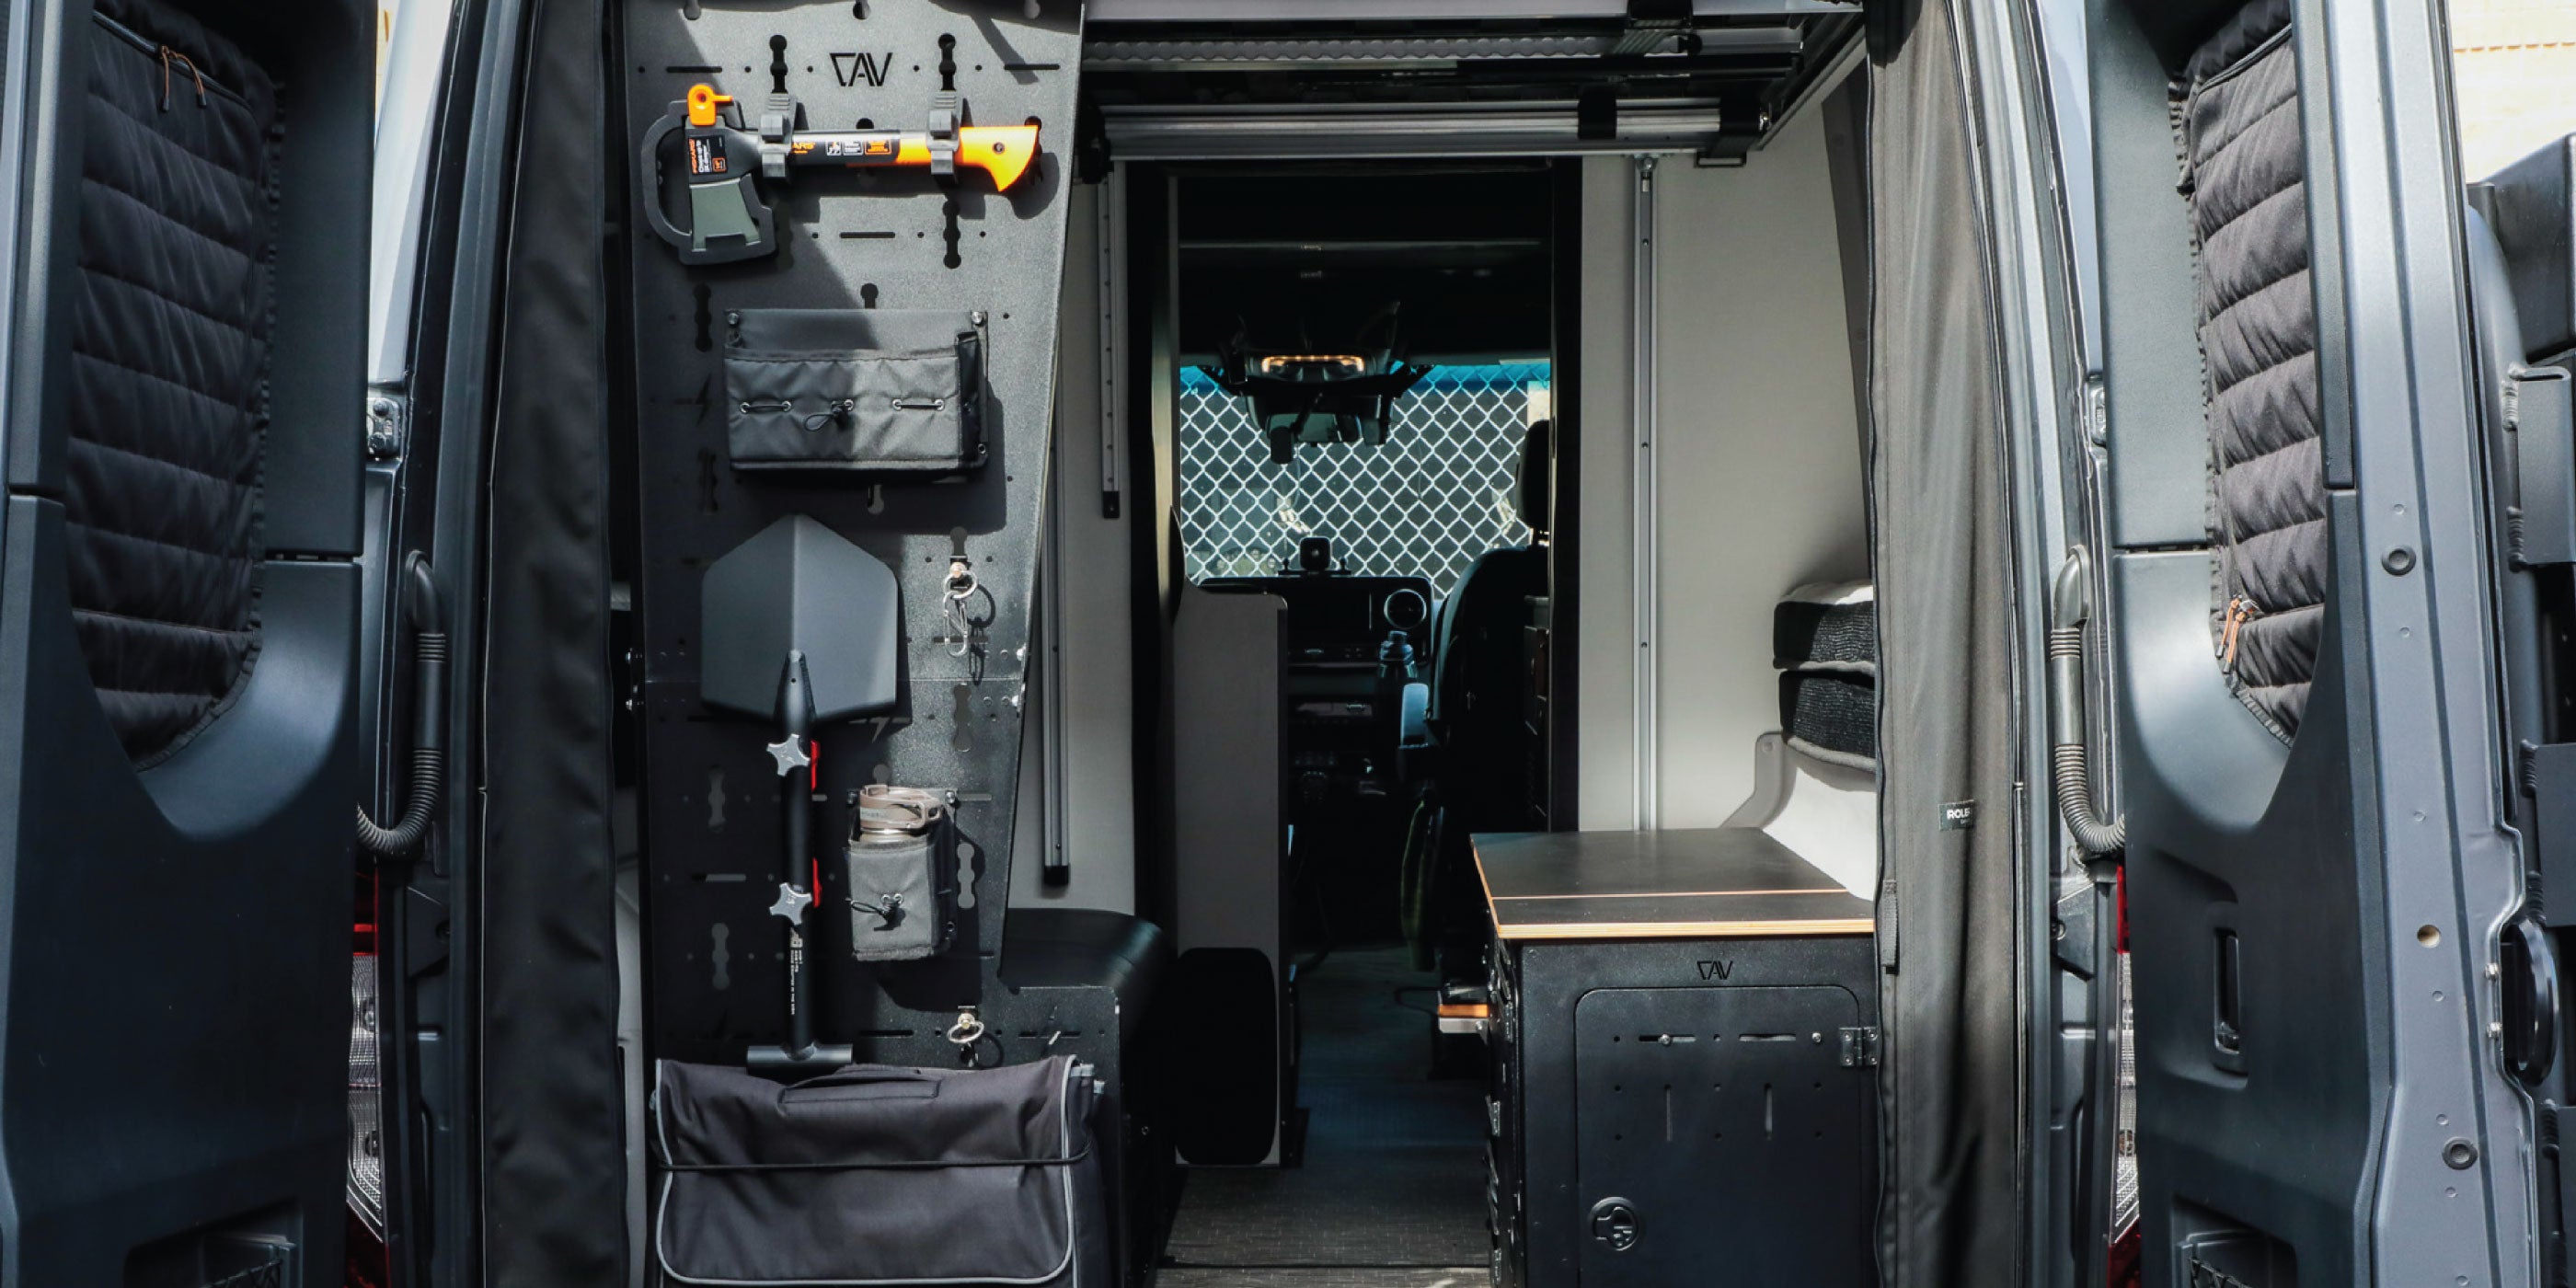 travel vans with slide outs